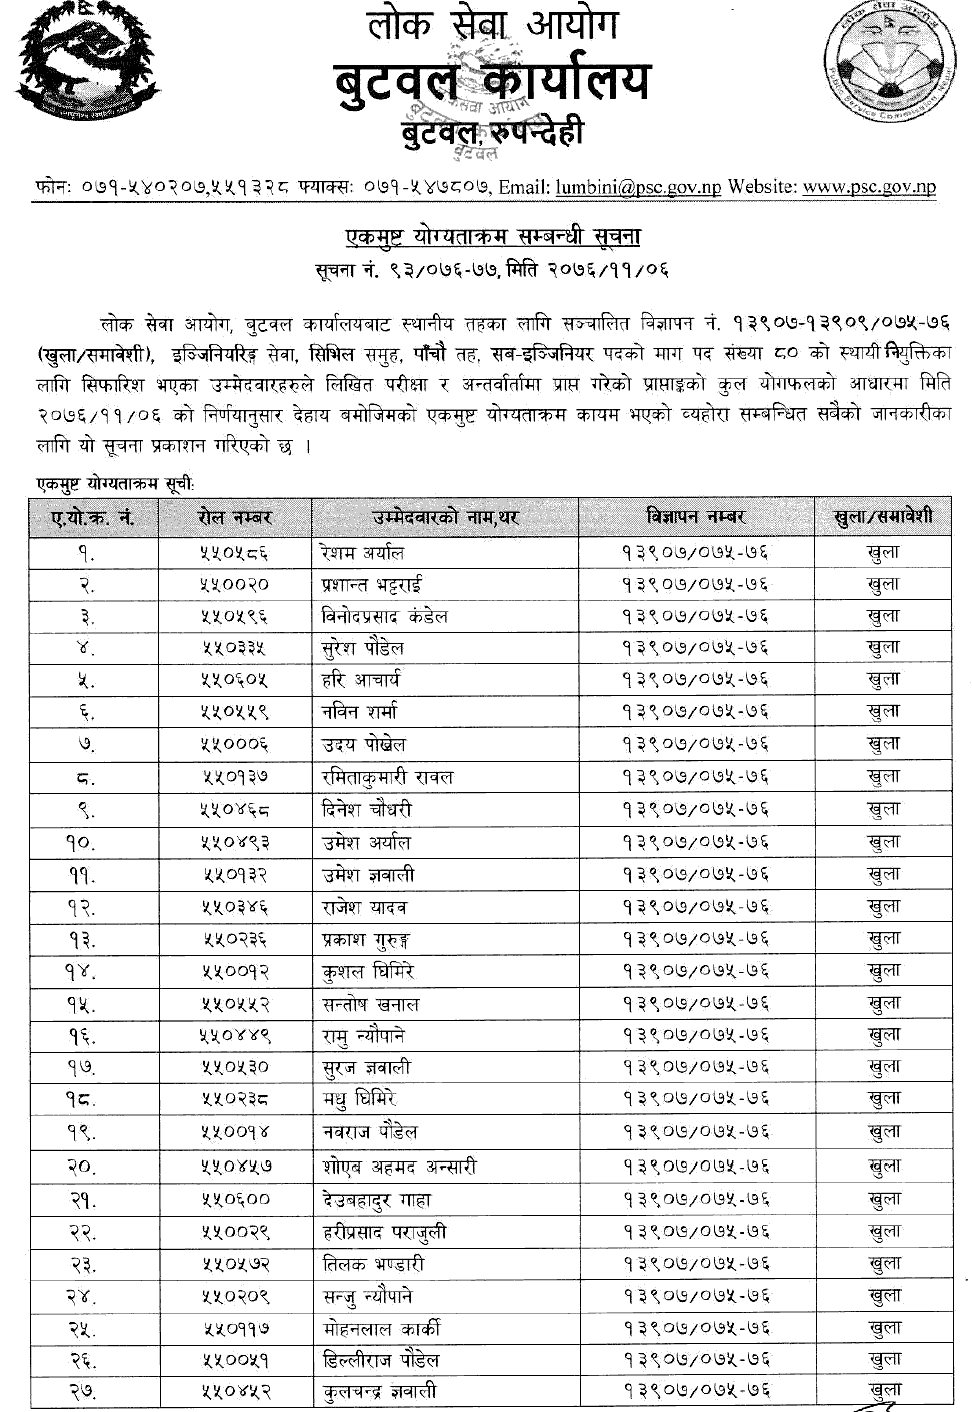 Lok Sewa Aayog Butwal Local Level 5th Sub Engineer Final Result and Recommendation